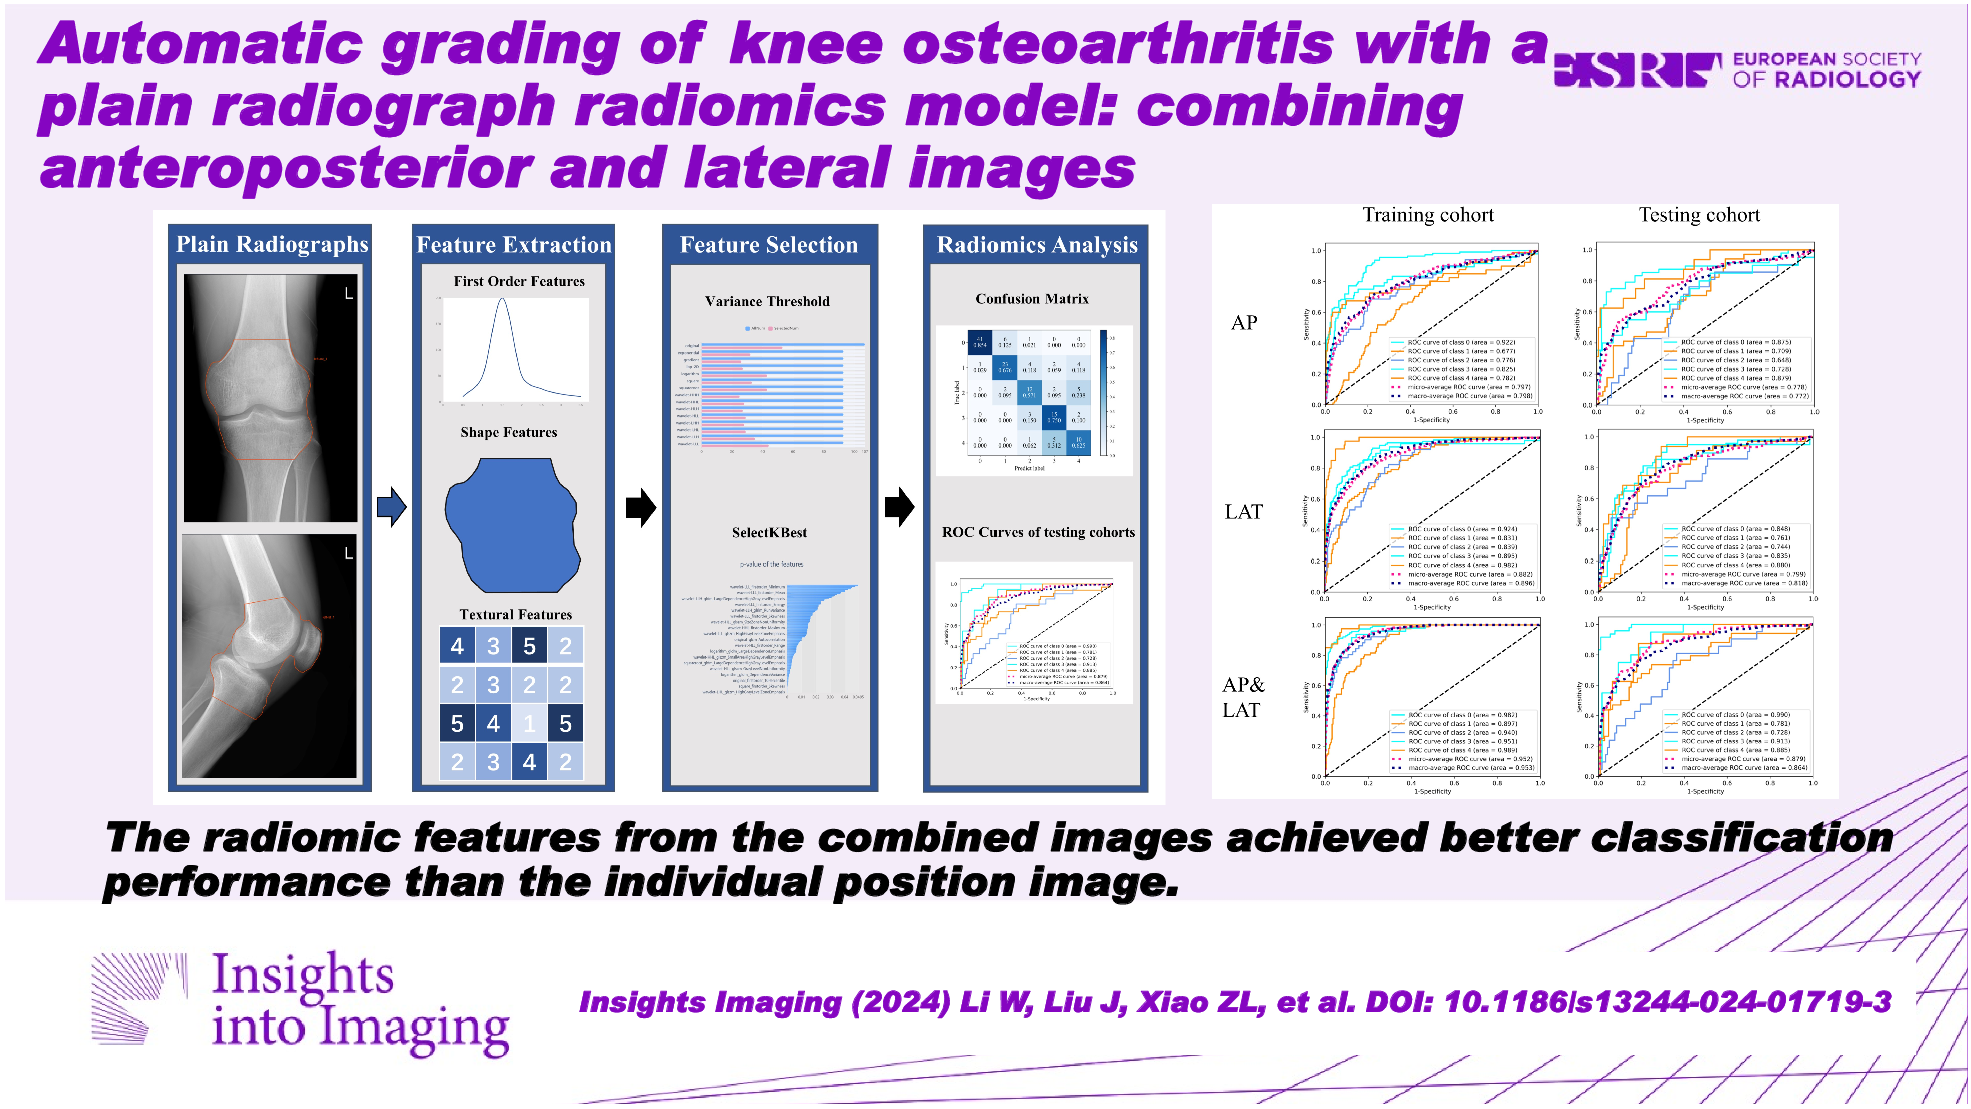 Automatic grading of knee osteoarthritis with a plain radiograph radiomics model: combining anteroposterior and lateral images